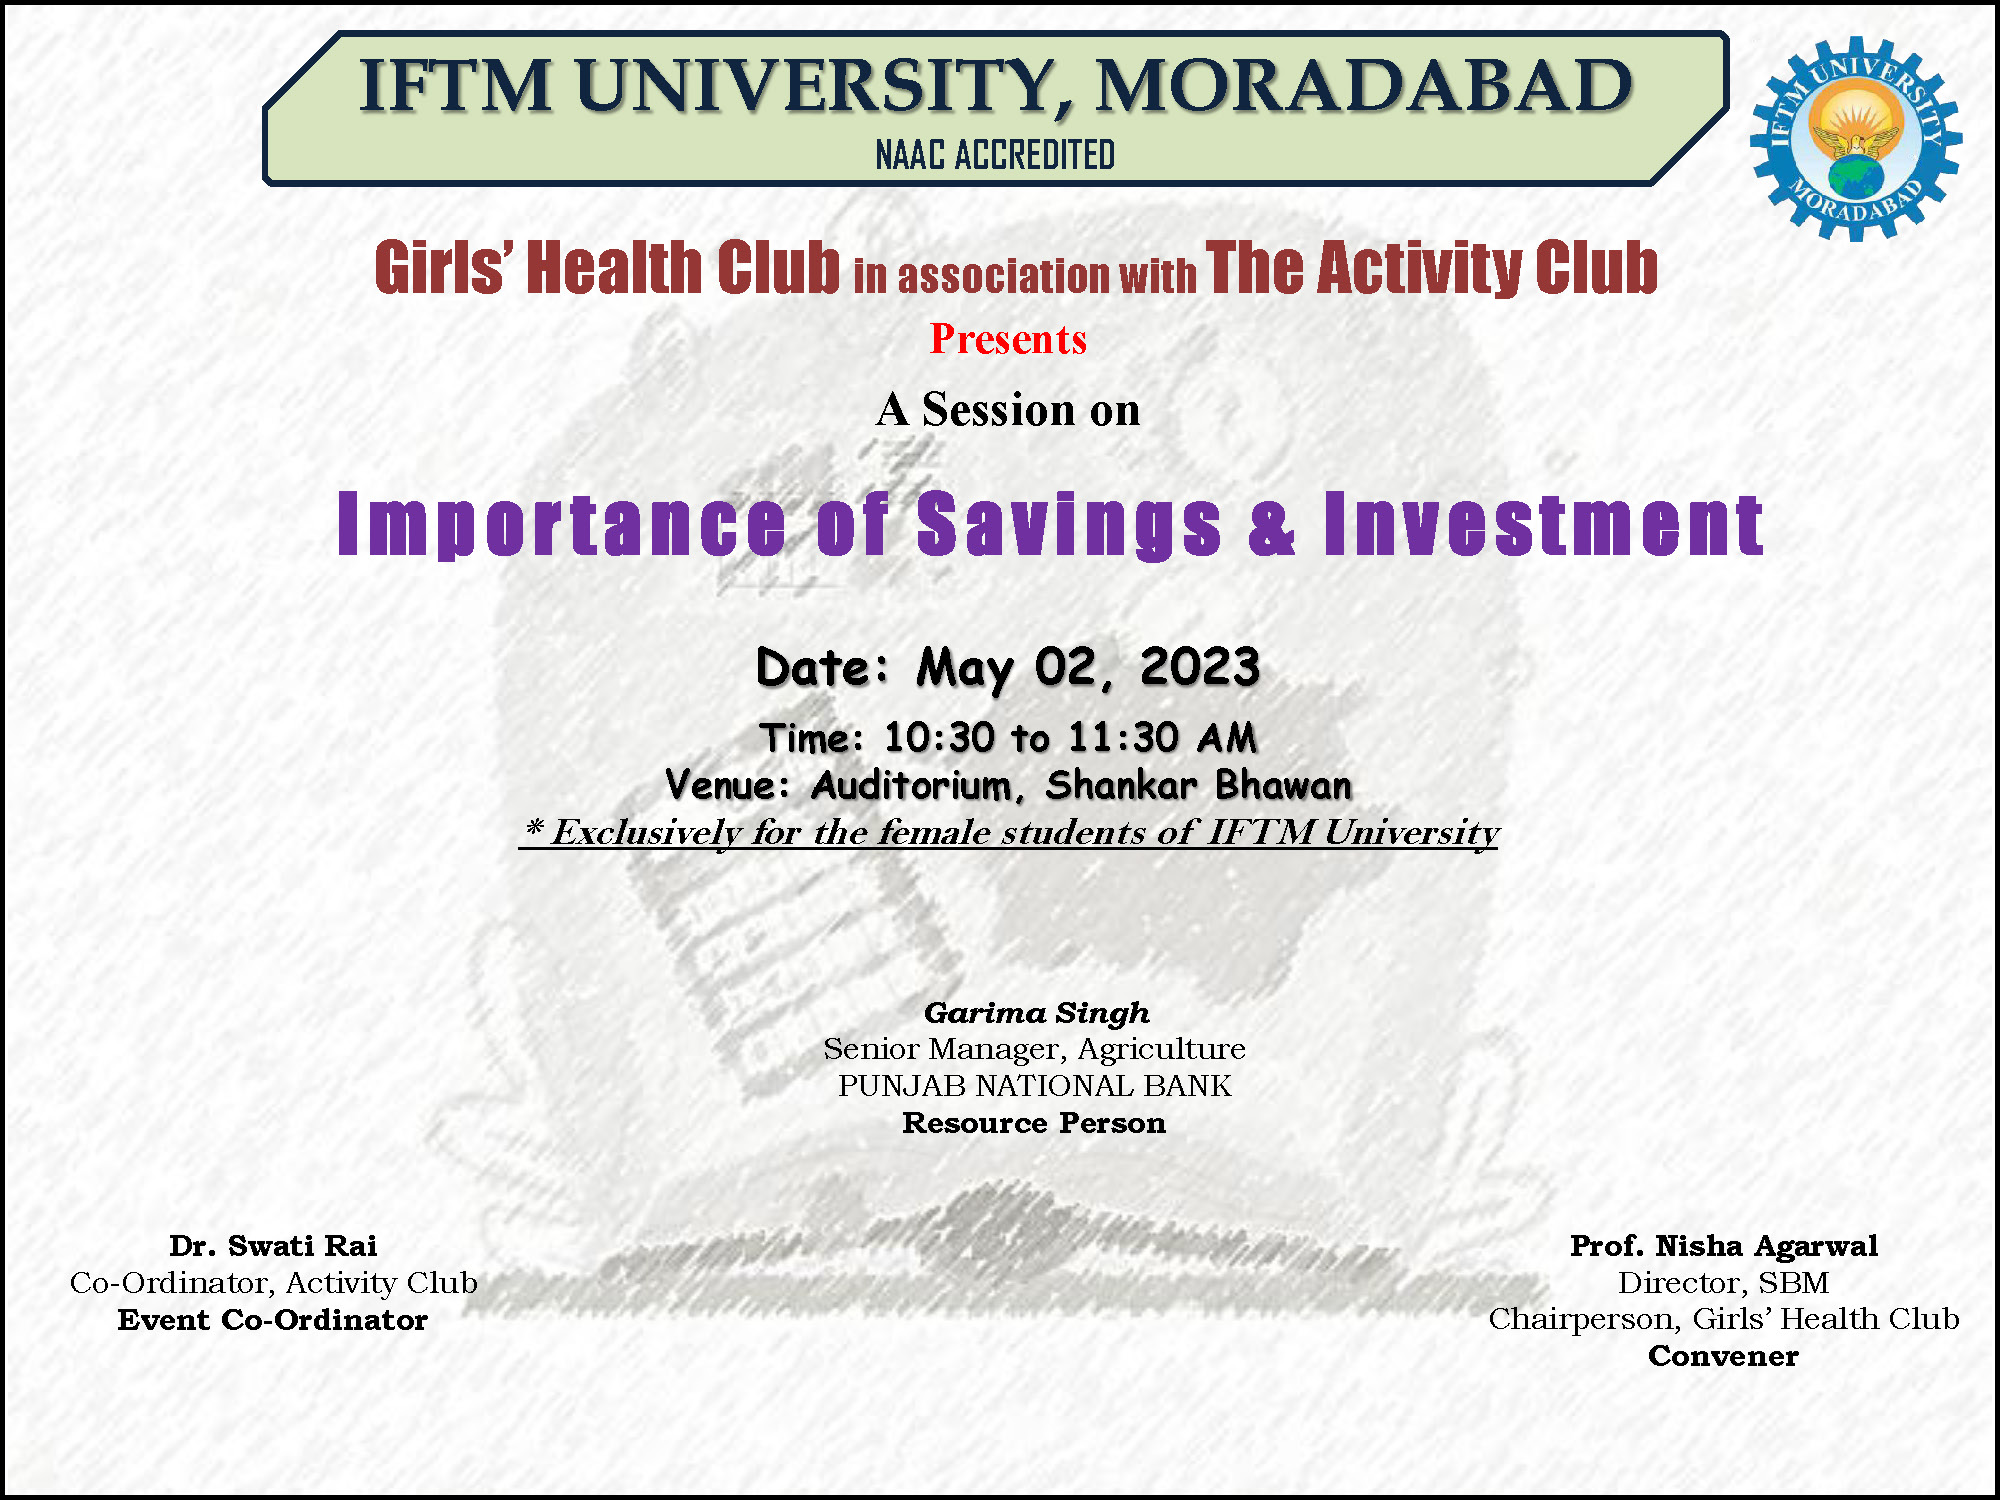 A Session on Importance of Savings & Investment